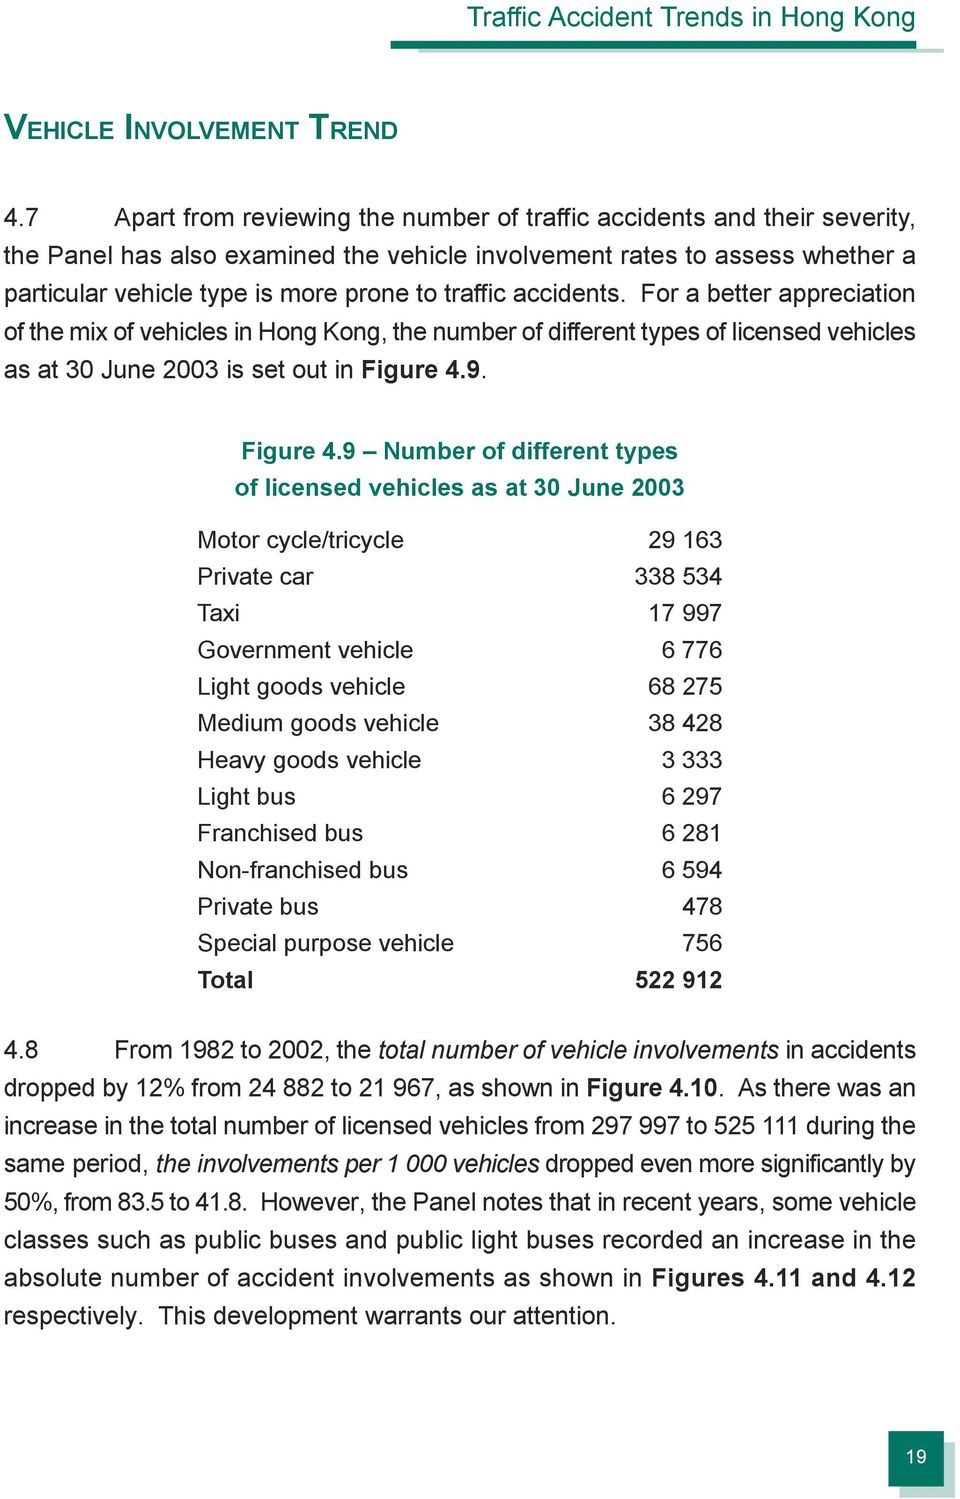 traffic accidents. For a better appreciation of the mix of vehicles in Hong Kong, the number of different types of licensed vehicles as at 30 June 2003 is set out in Figure 4.